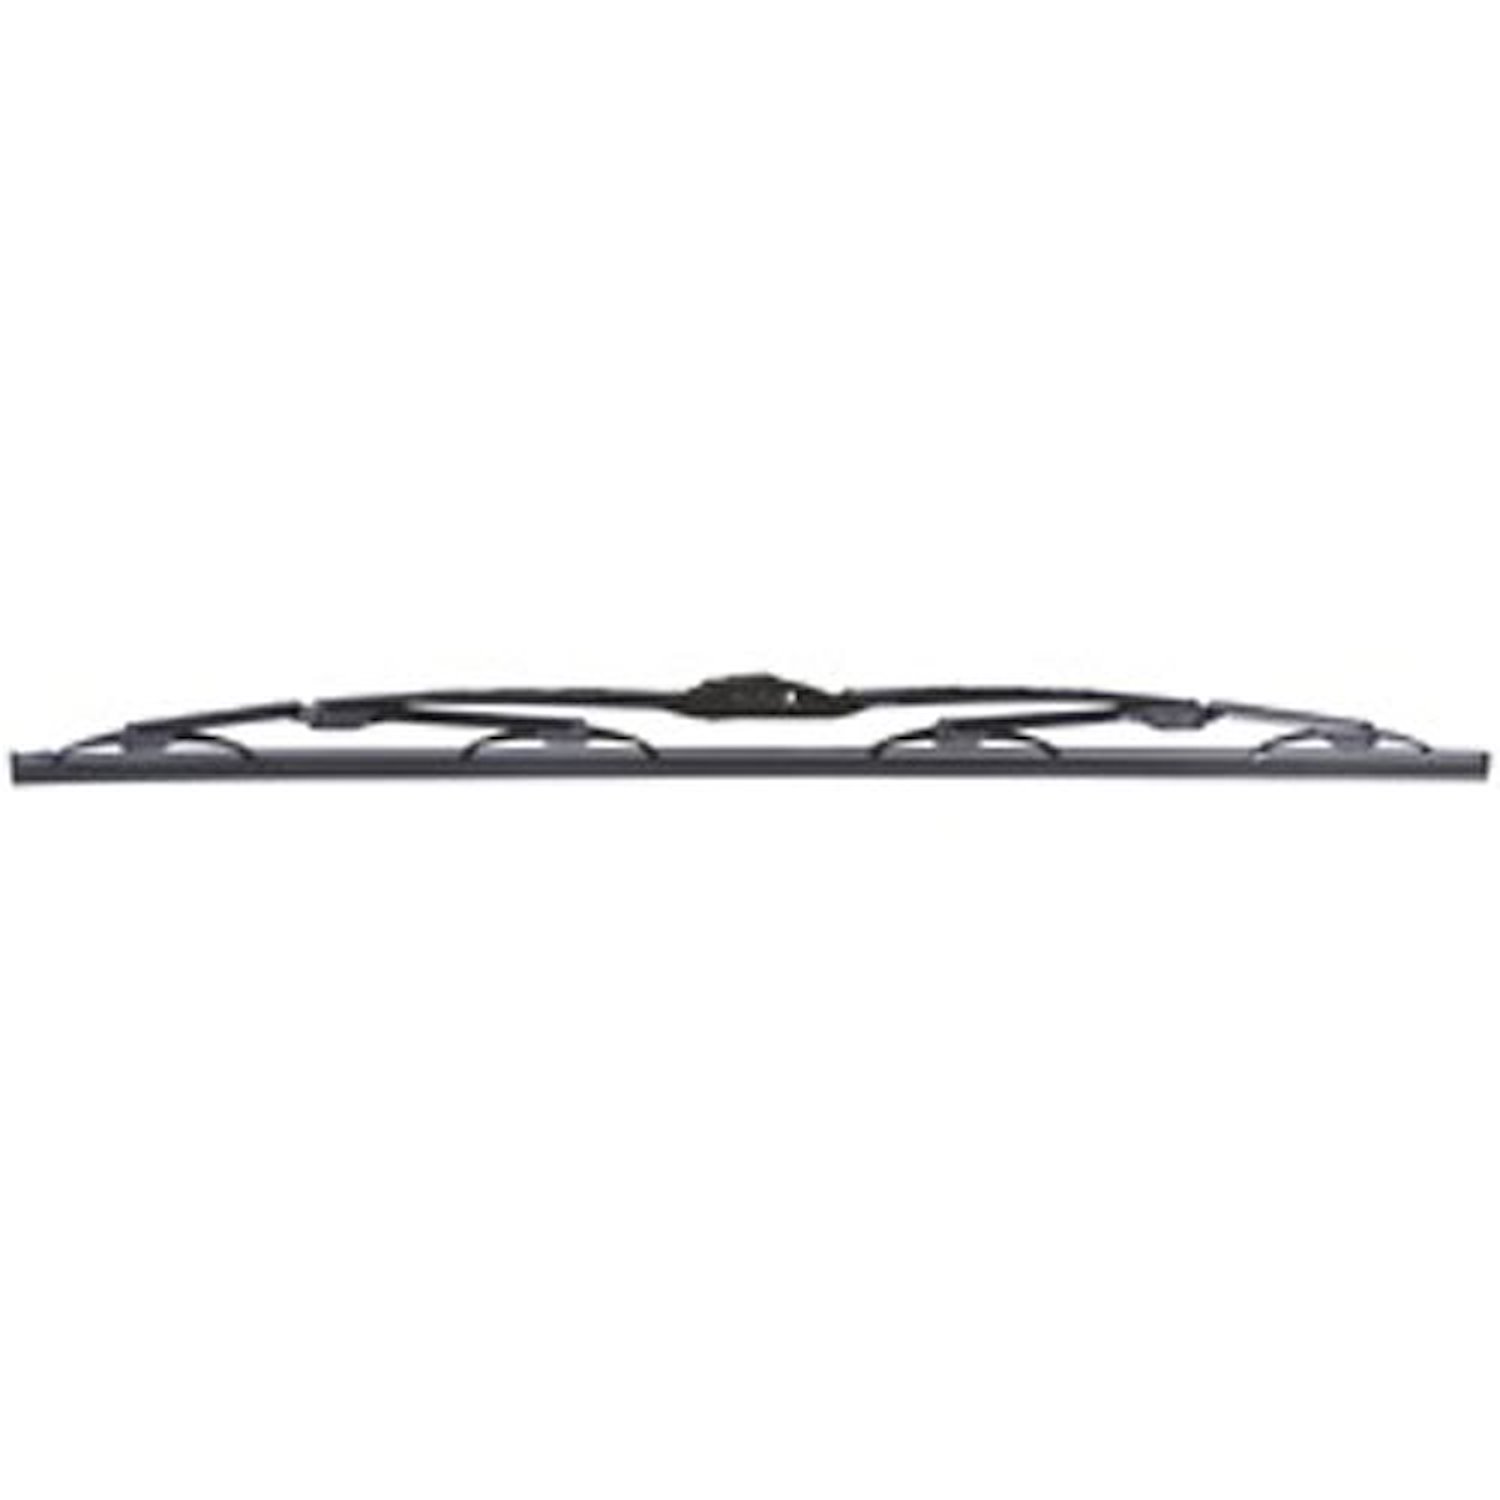 21 inch replacement windshield wiper blade from Omix-ADA, Fits left side on11-14 Jeep Grand Cherokees.